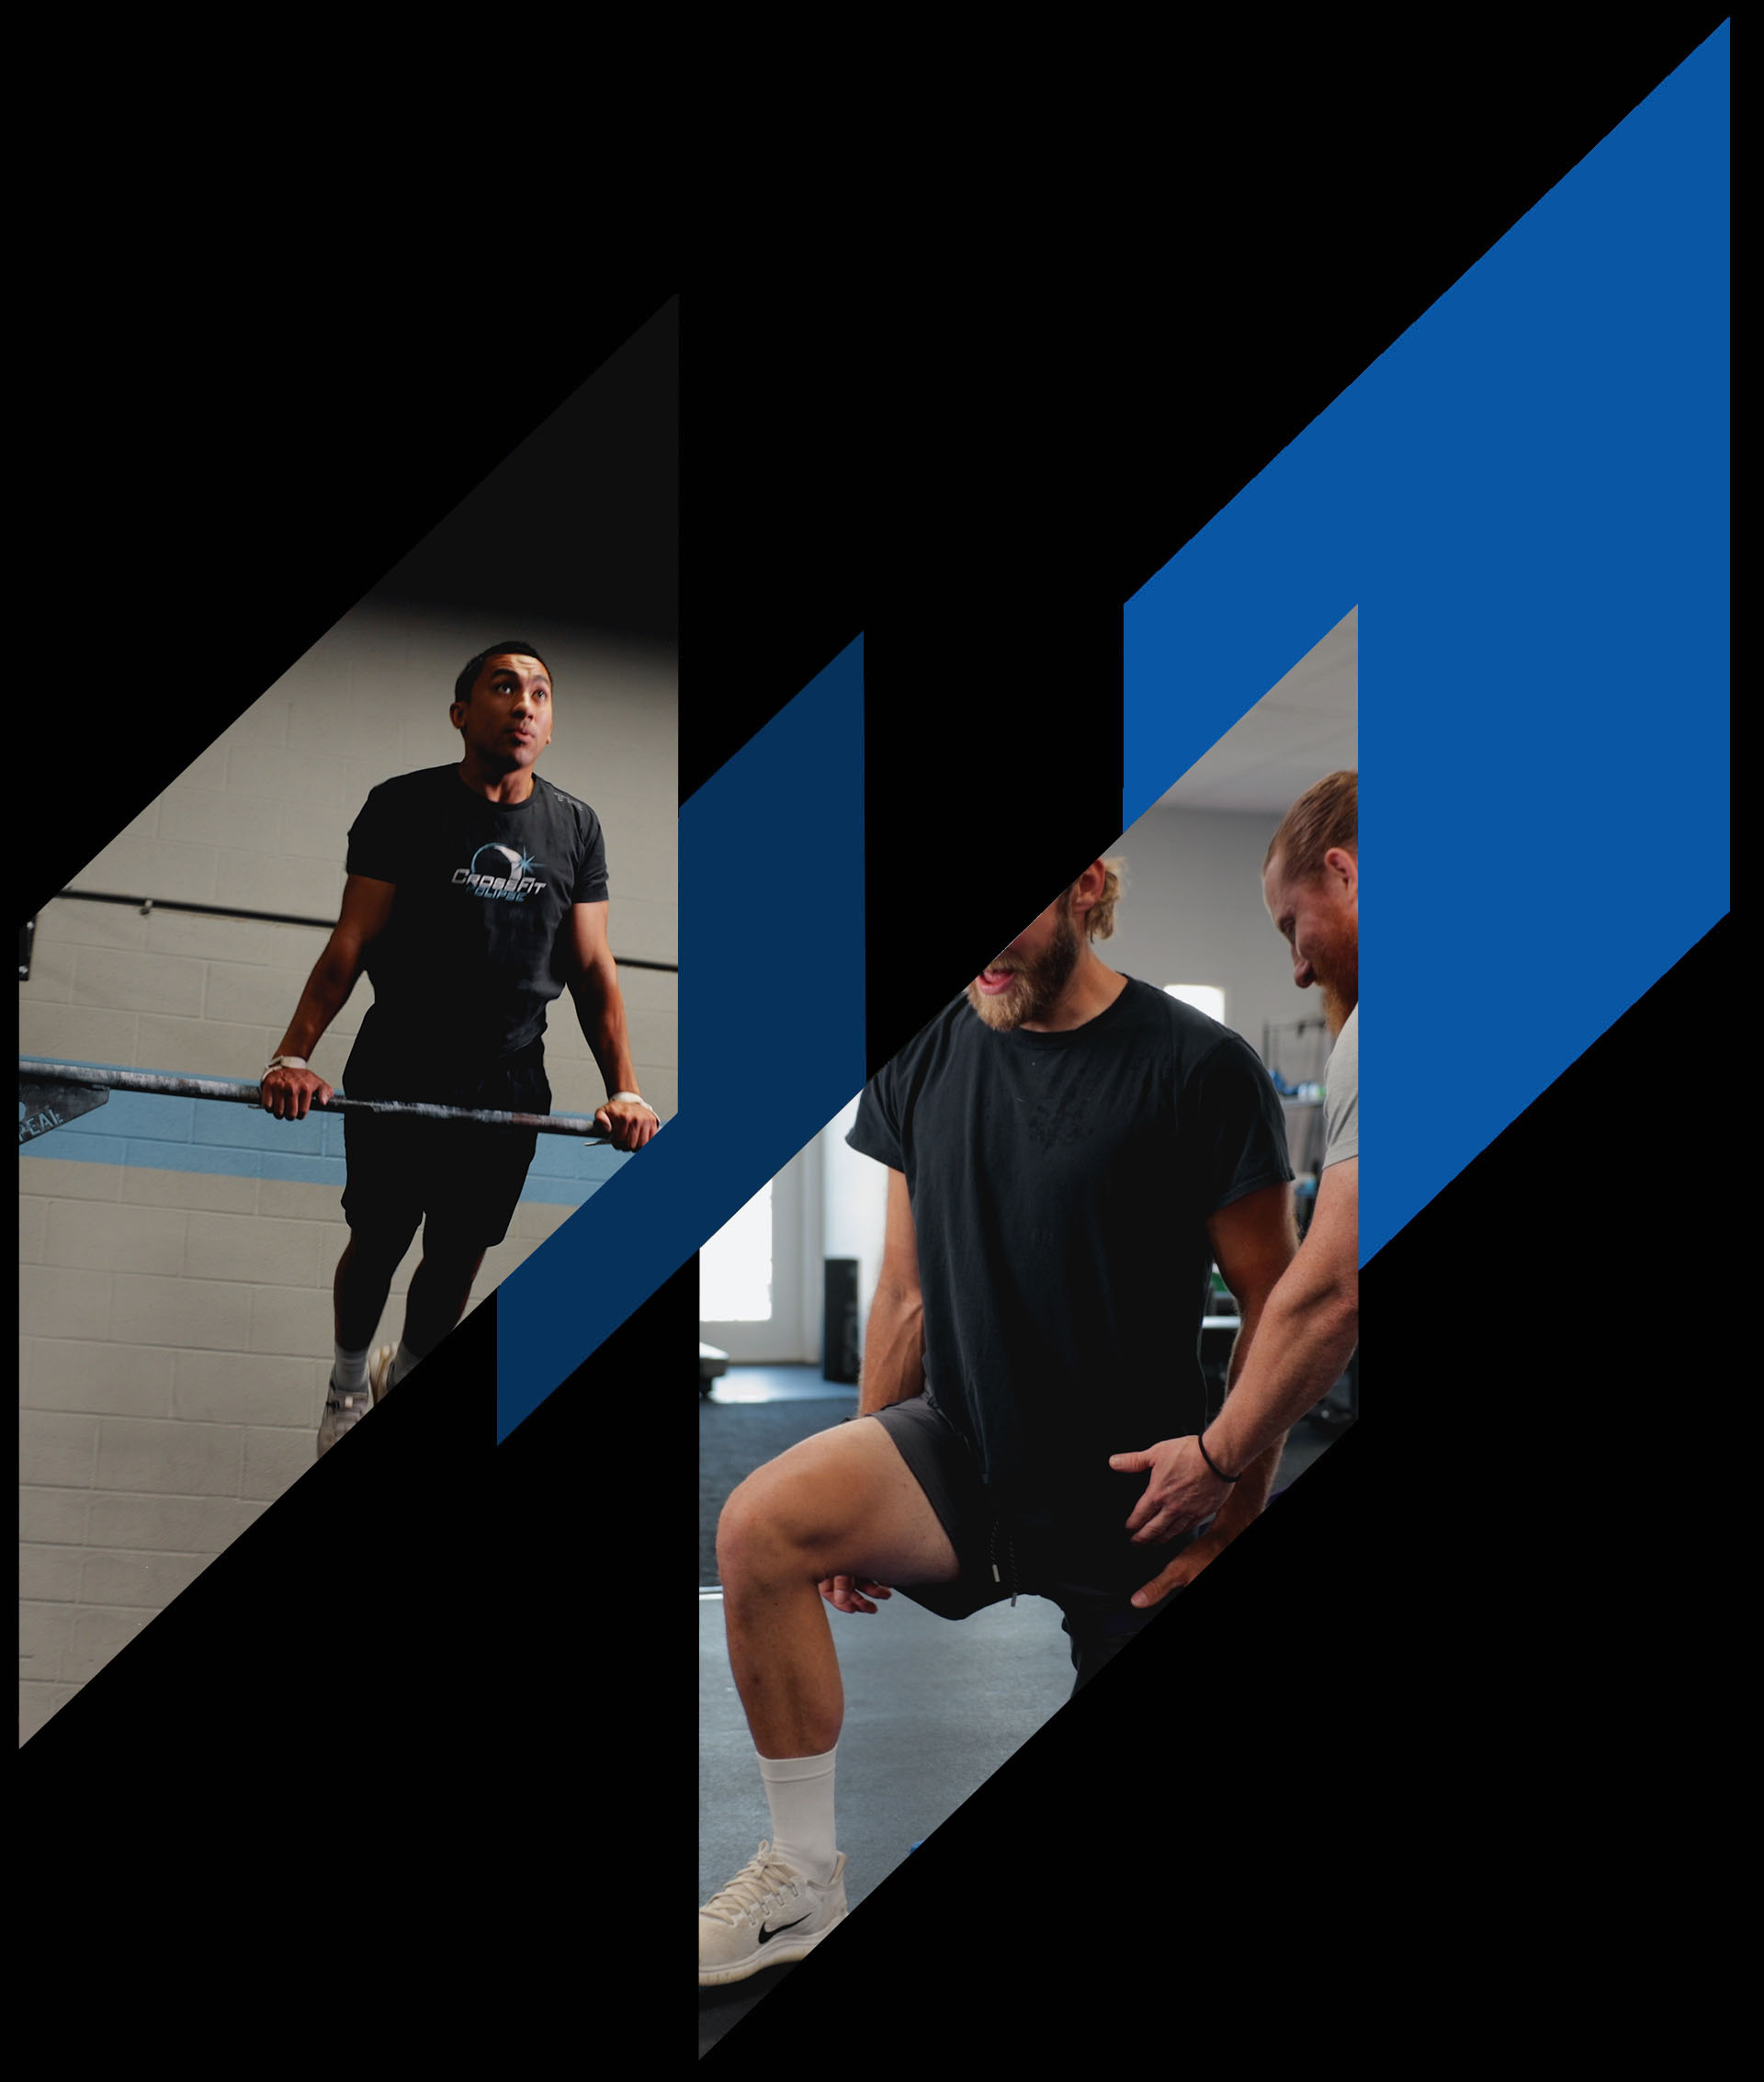 A stylized image collage of two scenes: on the left, a young man in a gym partakes in physical therapy exercises; on the right, two men engage in a focused conversation about pelvic health